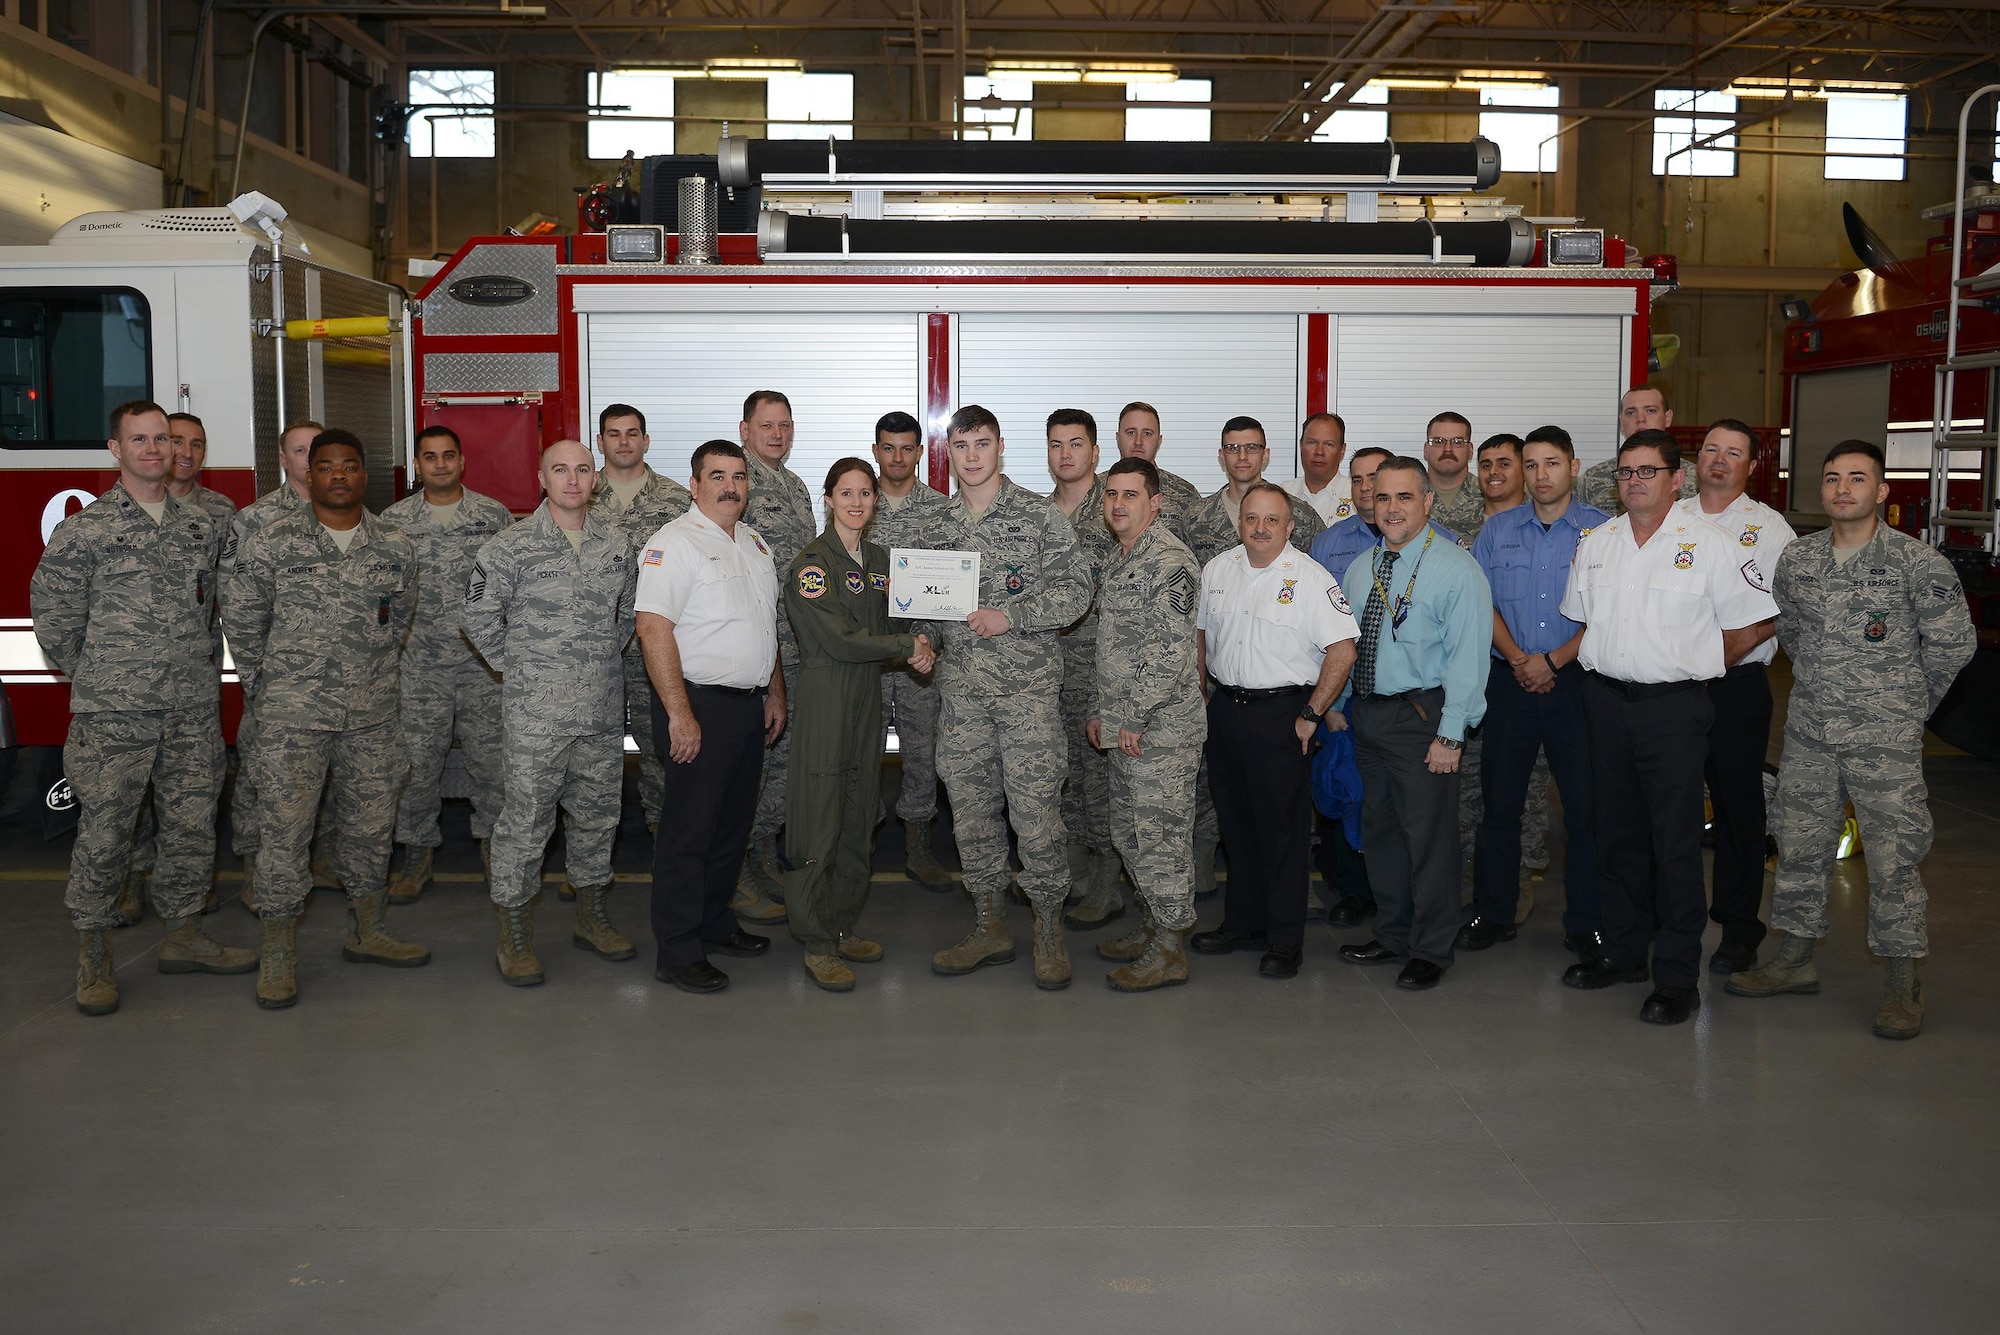 Airman 1st Class James Nicholson III, 47th Civil Engineer Squadron fire protection apprentice (front center), accepts the “XLer of the Week” award from Col. Michelle Pryor, 47th Flying Training Wing vice commander (front left), and Chief Master Sgt. George Richey, 47th FTW command chief (front right), on Laughlin Air Force Base, Texas, Jan. 25, 2017. The XLer is a weekly award chosen by wing leadership and is presented to those who consistently make outstanding contributions to their unit and Laughlin. (U.S. Air Force photo/Airman 1st Class Benjamin N. Valmoja)